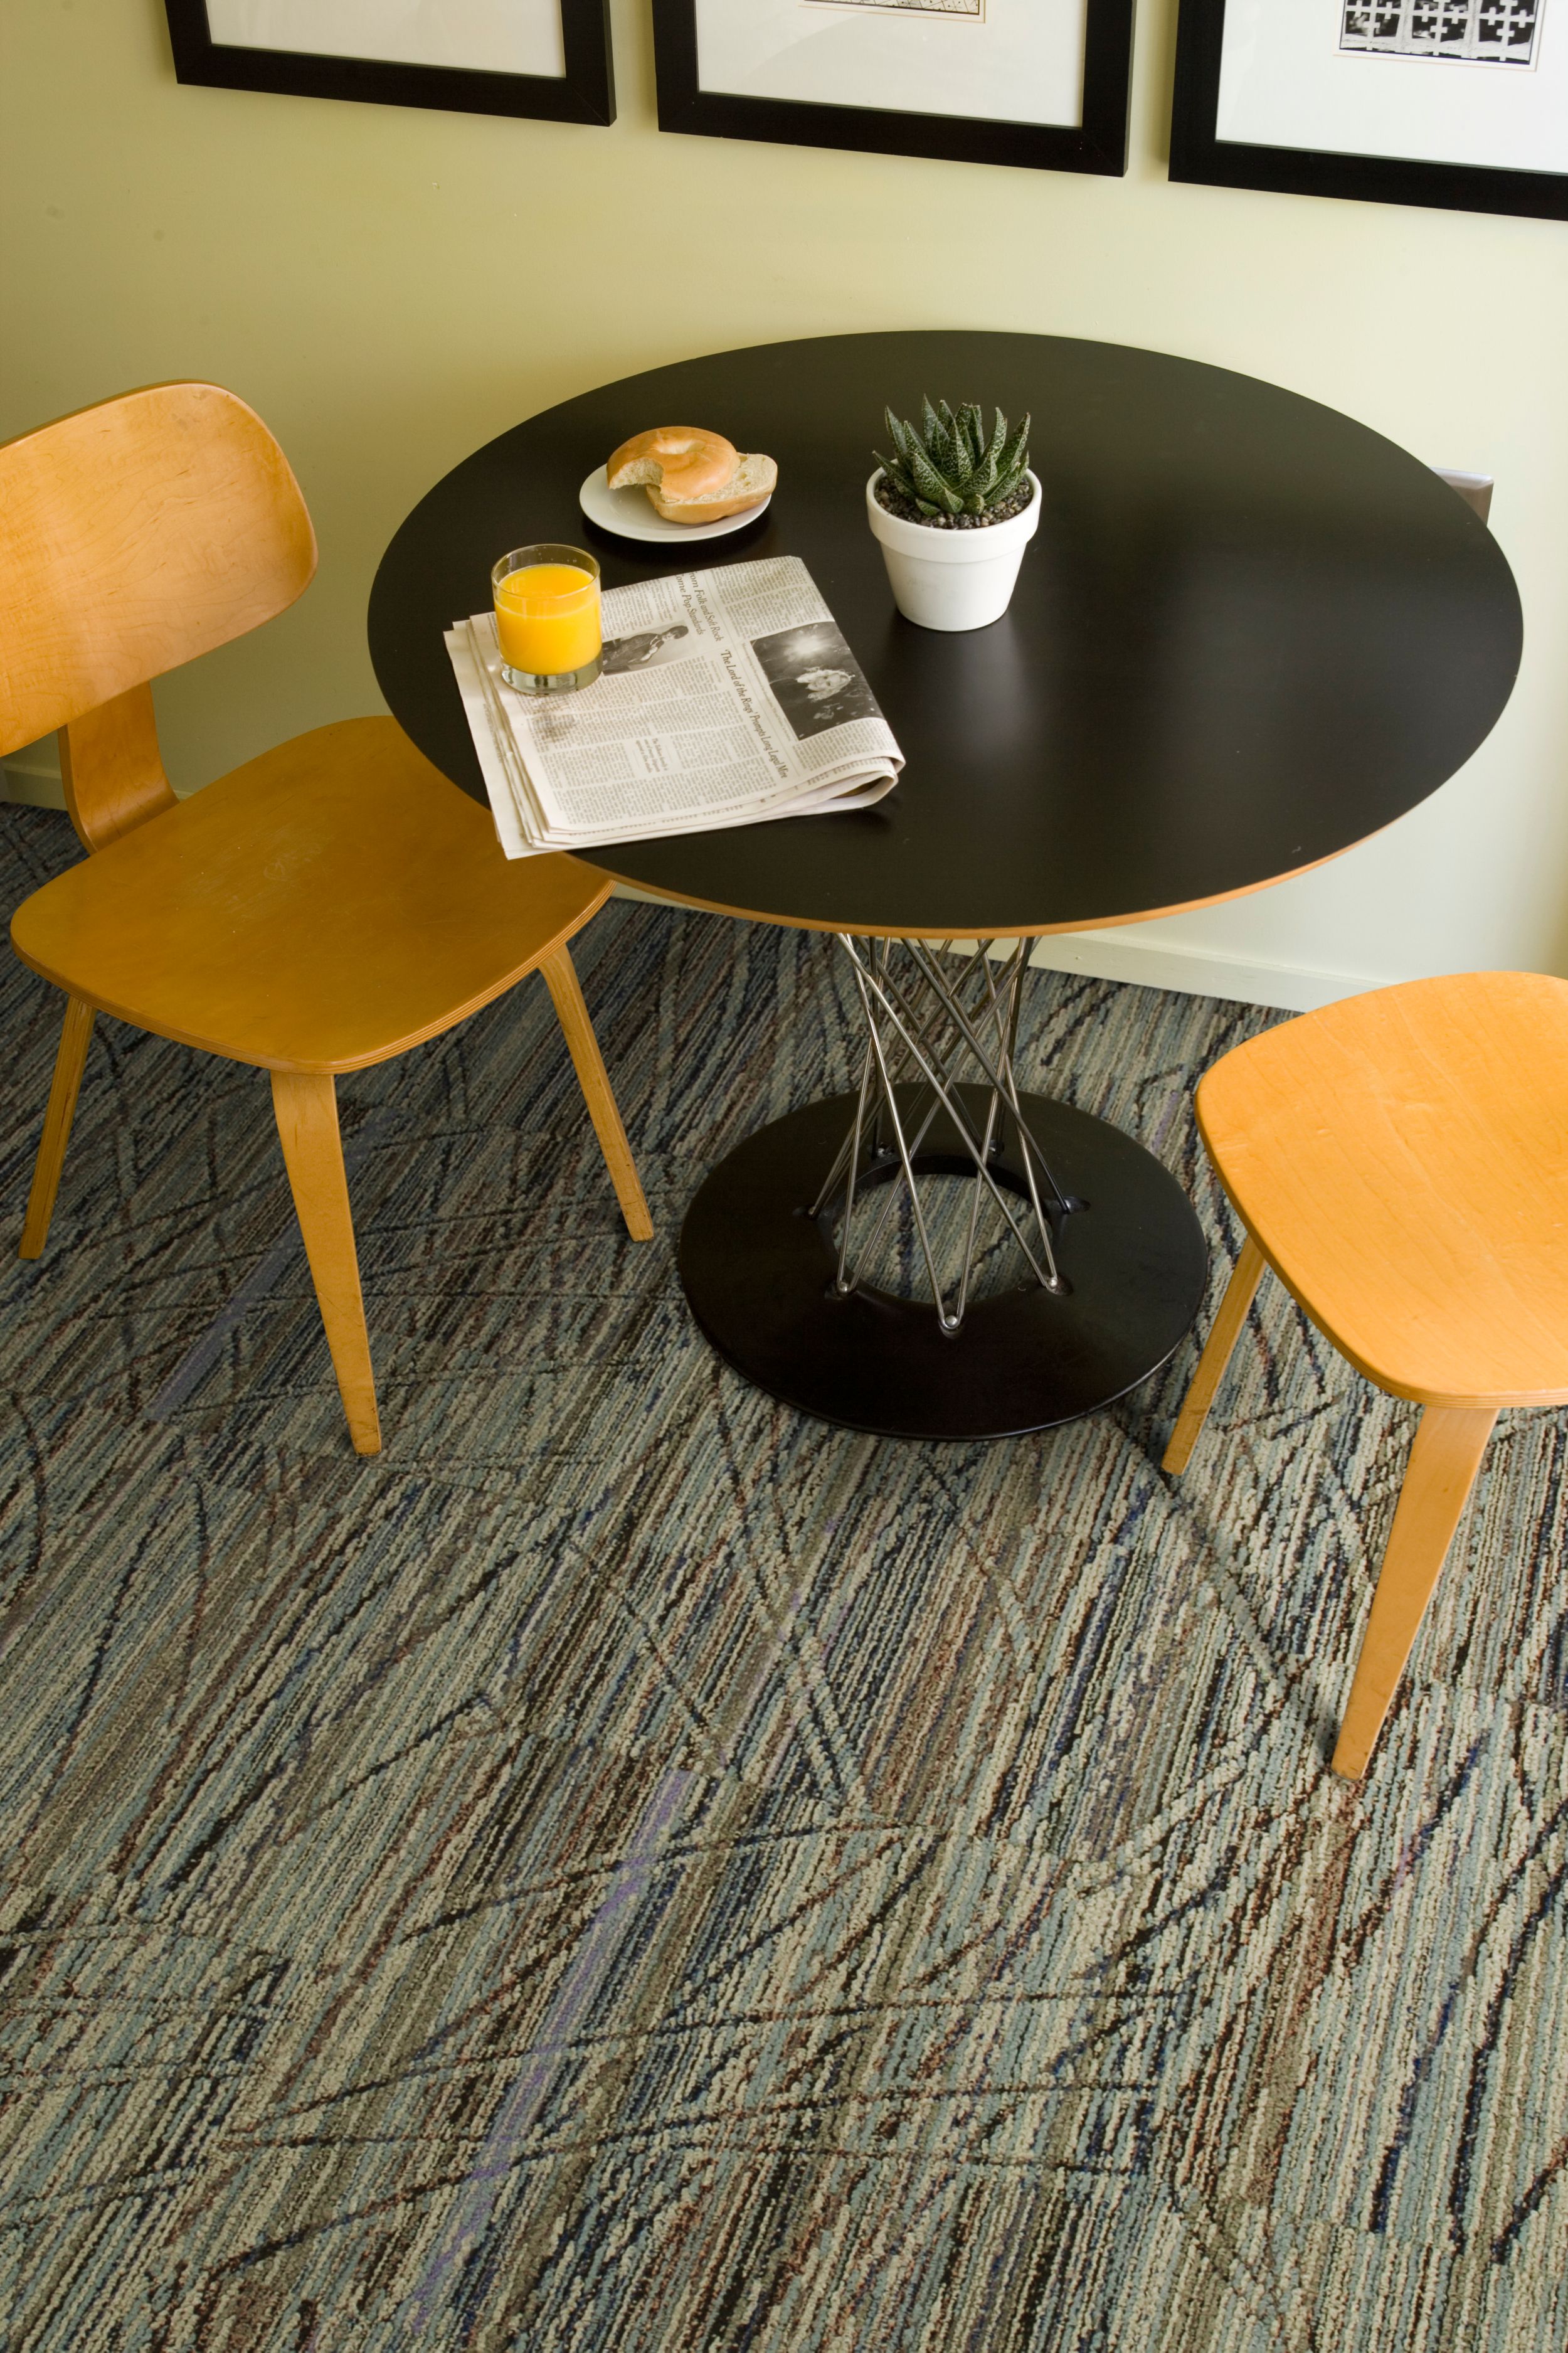 Detail of Interface Prairie Grass carpet tile in break area with table and two chairs image number 5